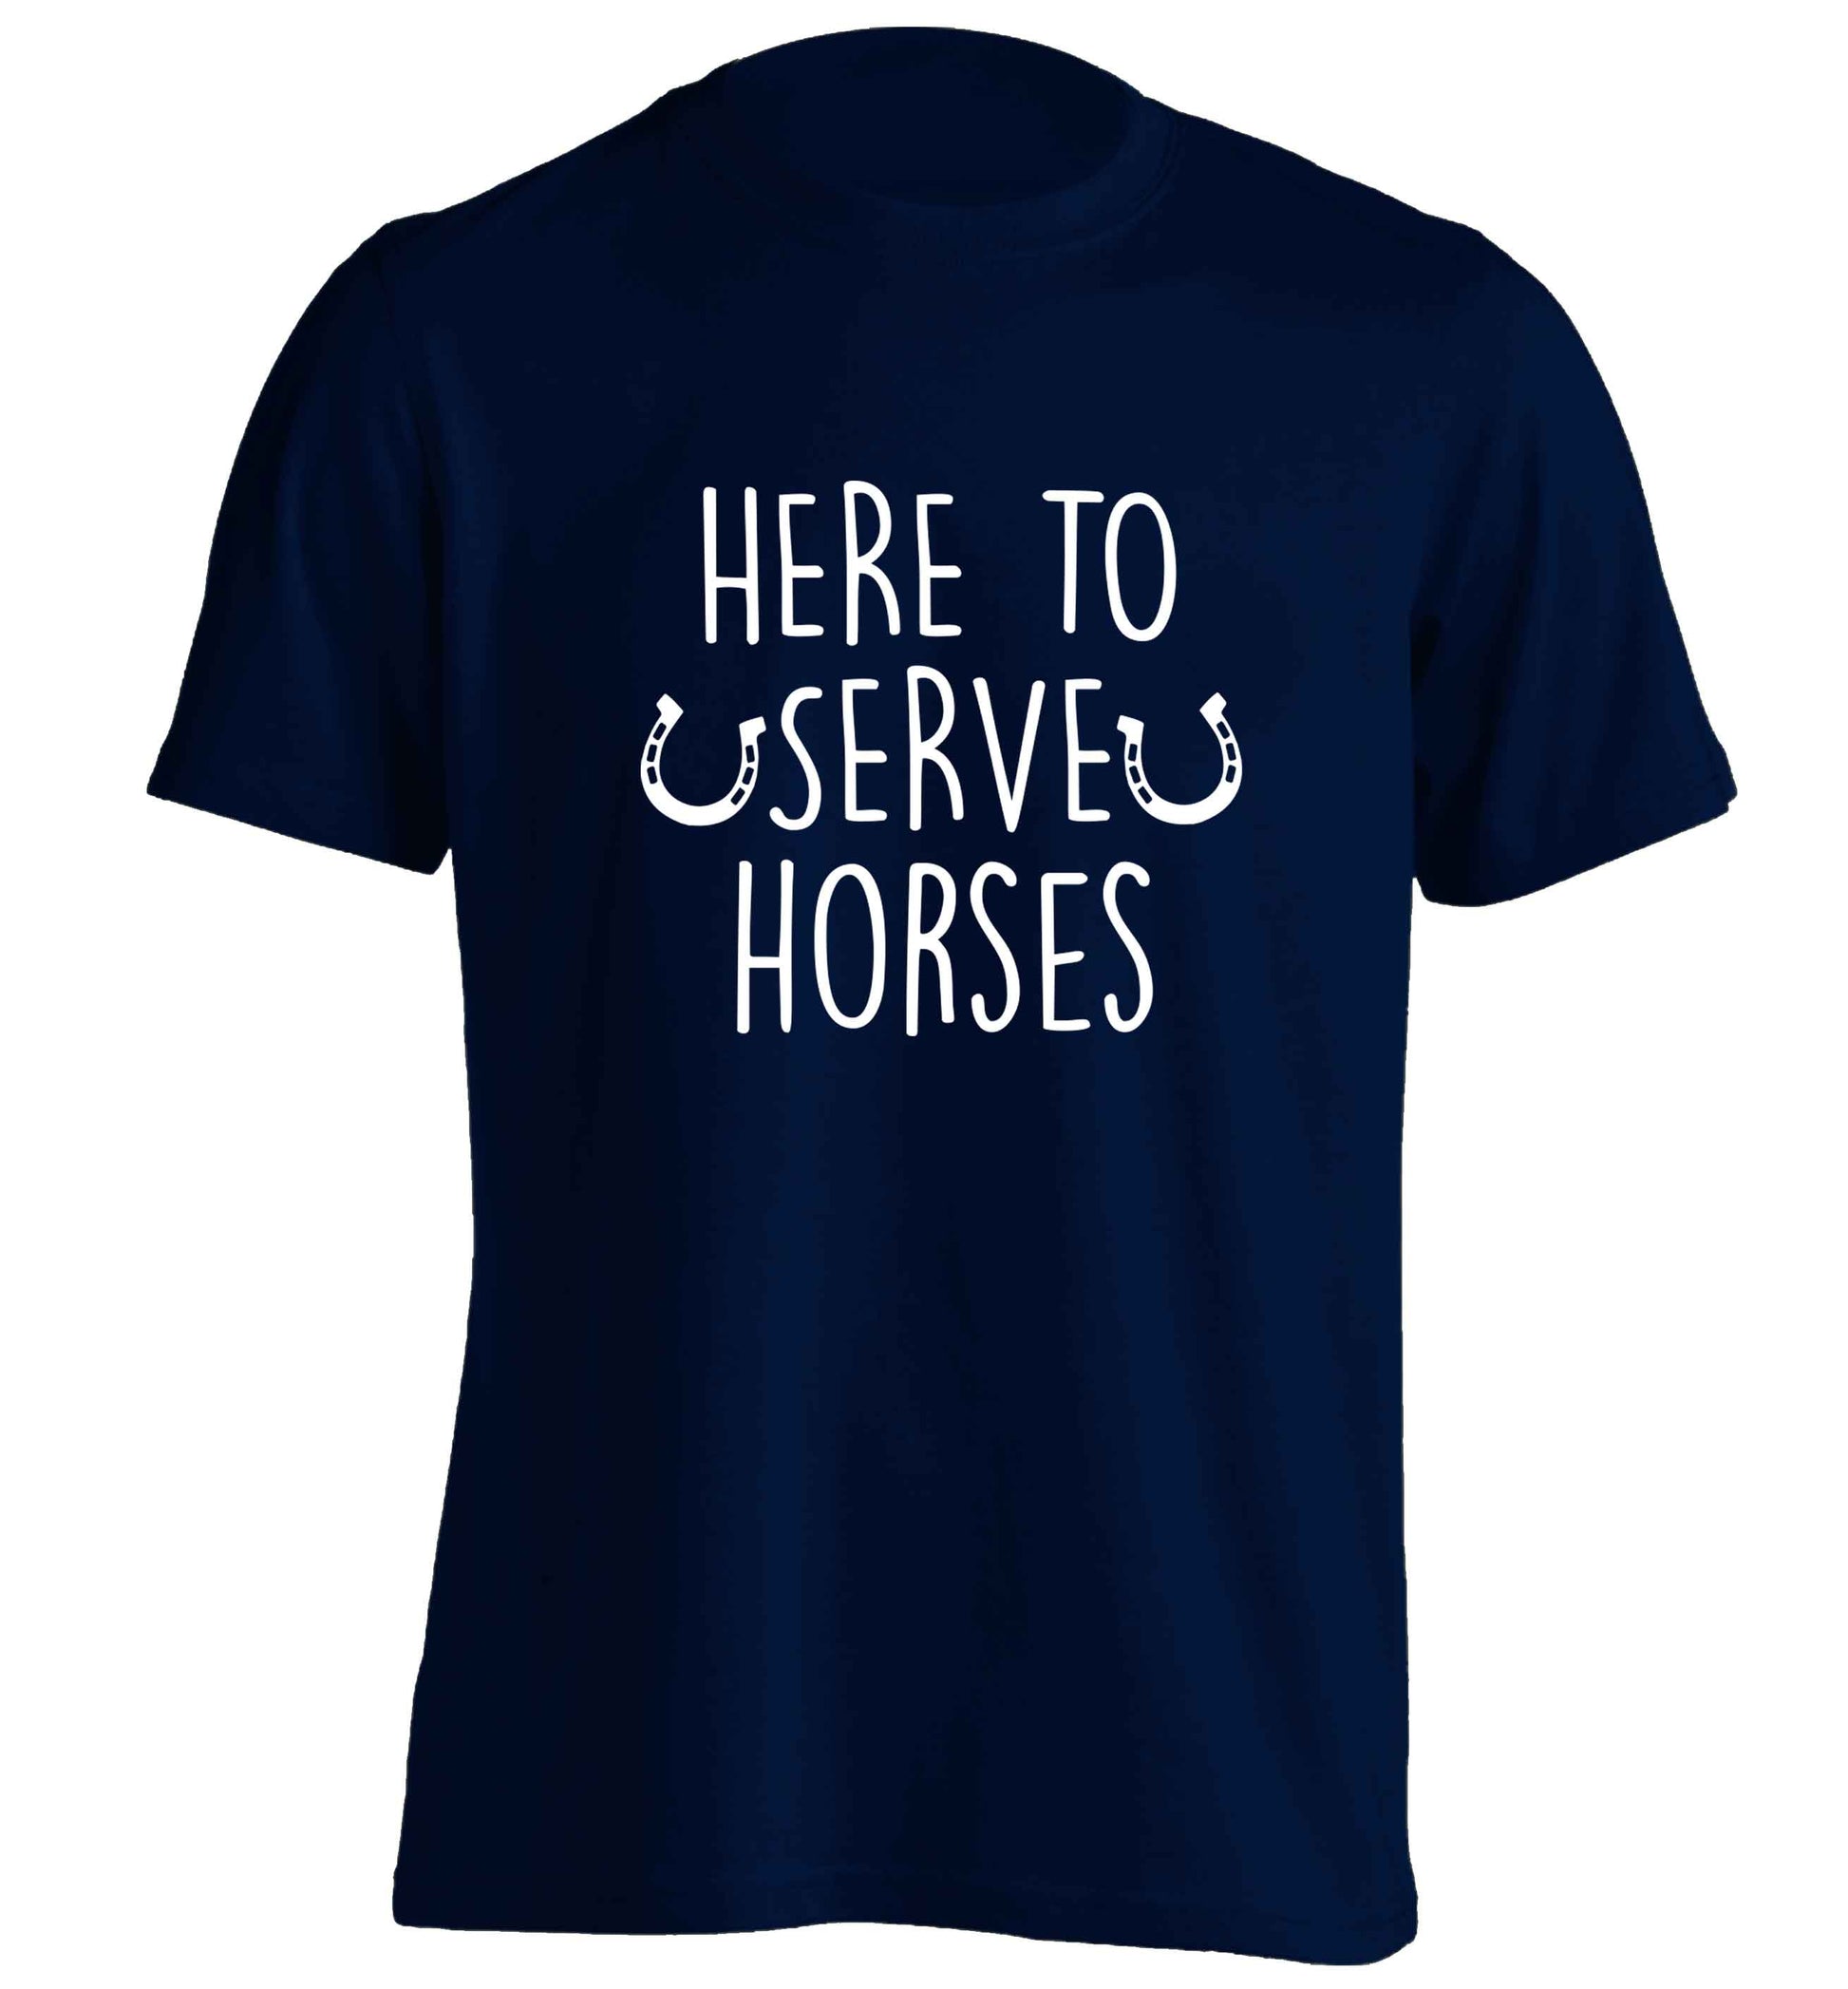 Here to serve horses adults unisex navy Tshirt 2XL